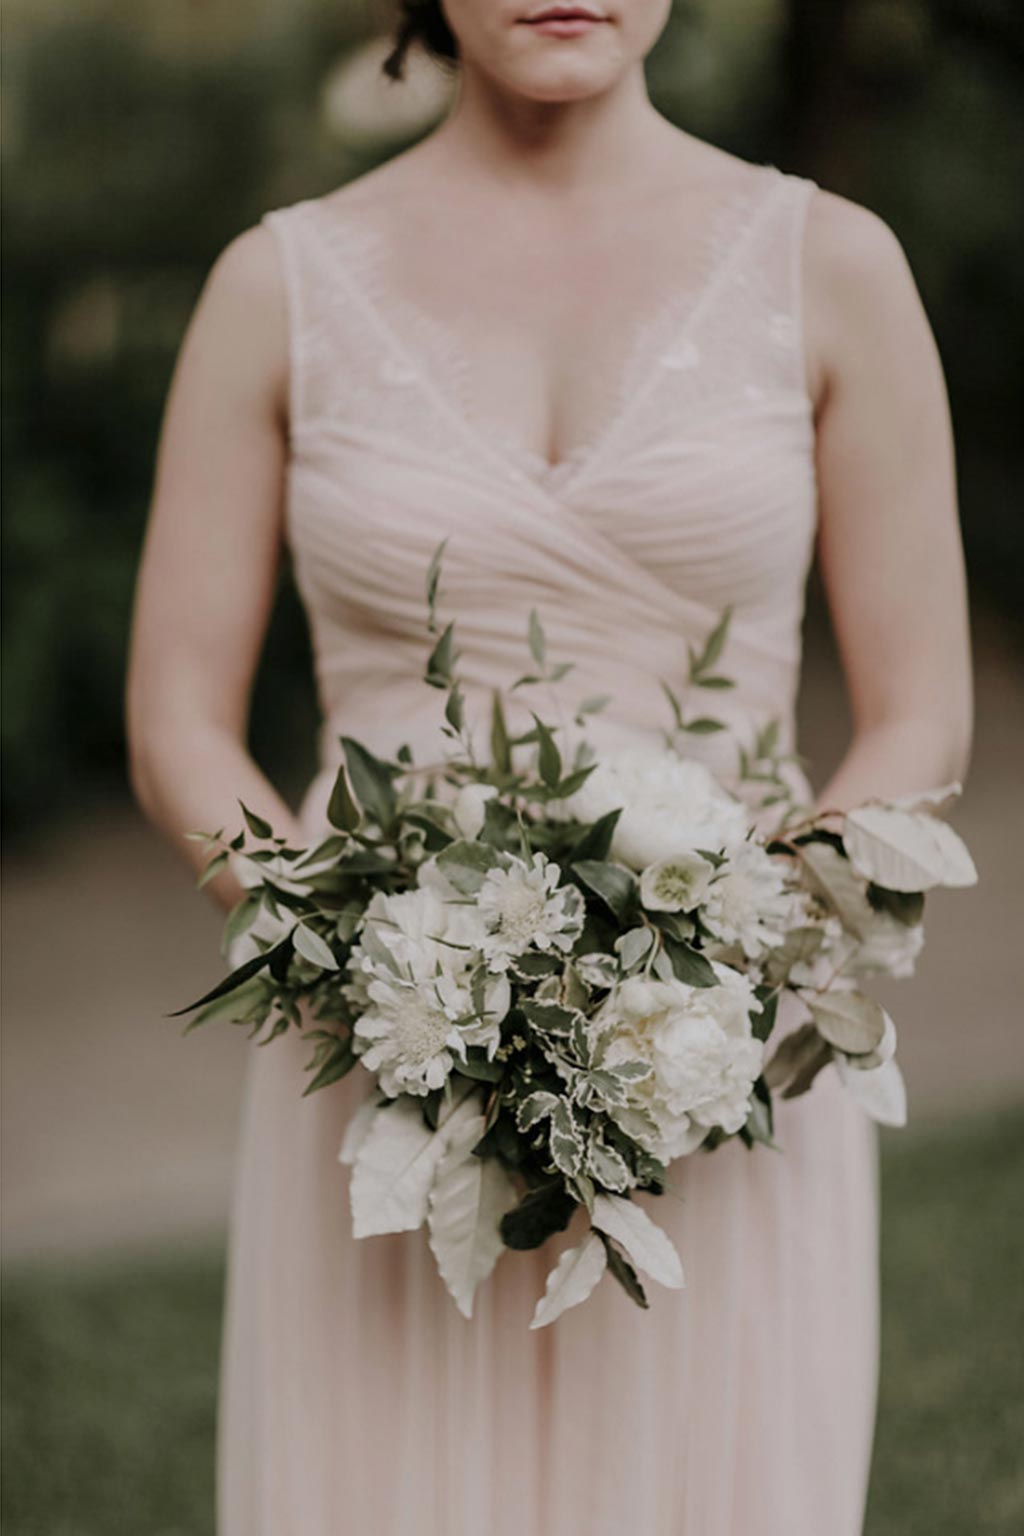 Bridesmaid with peach sleeveless gown and white and green natural bouquet